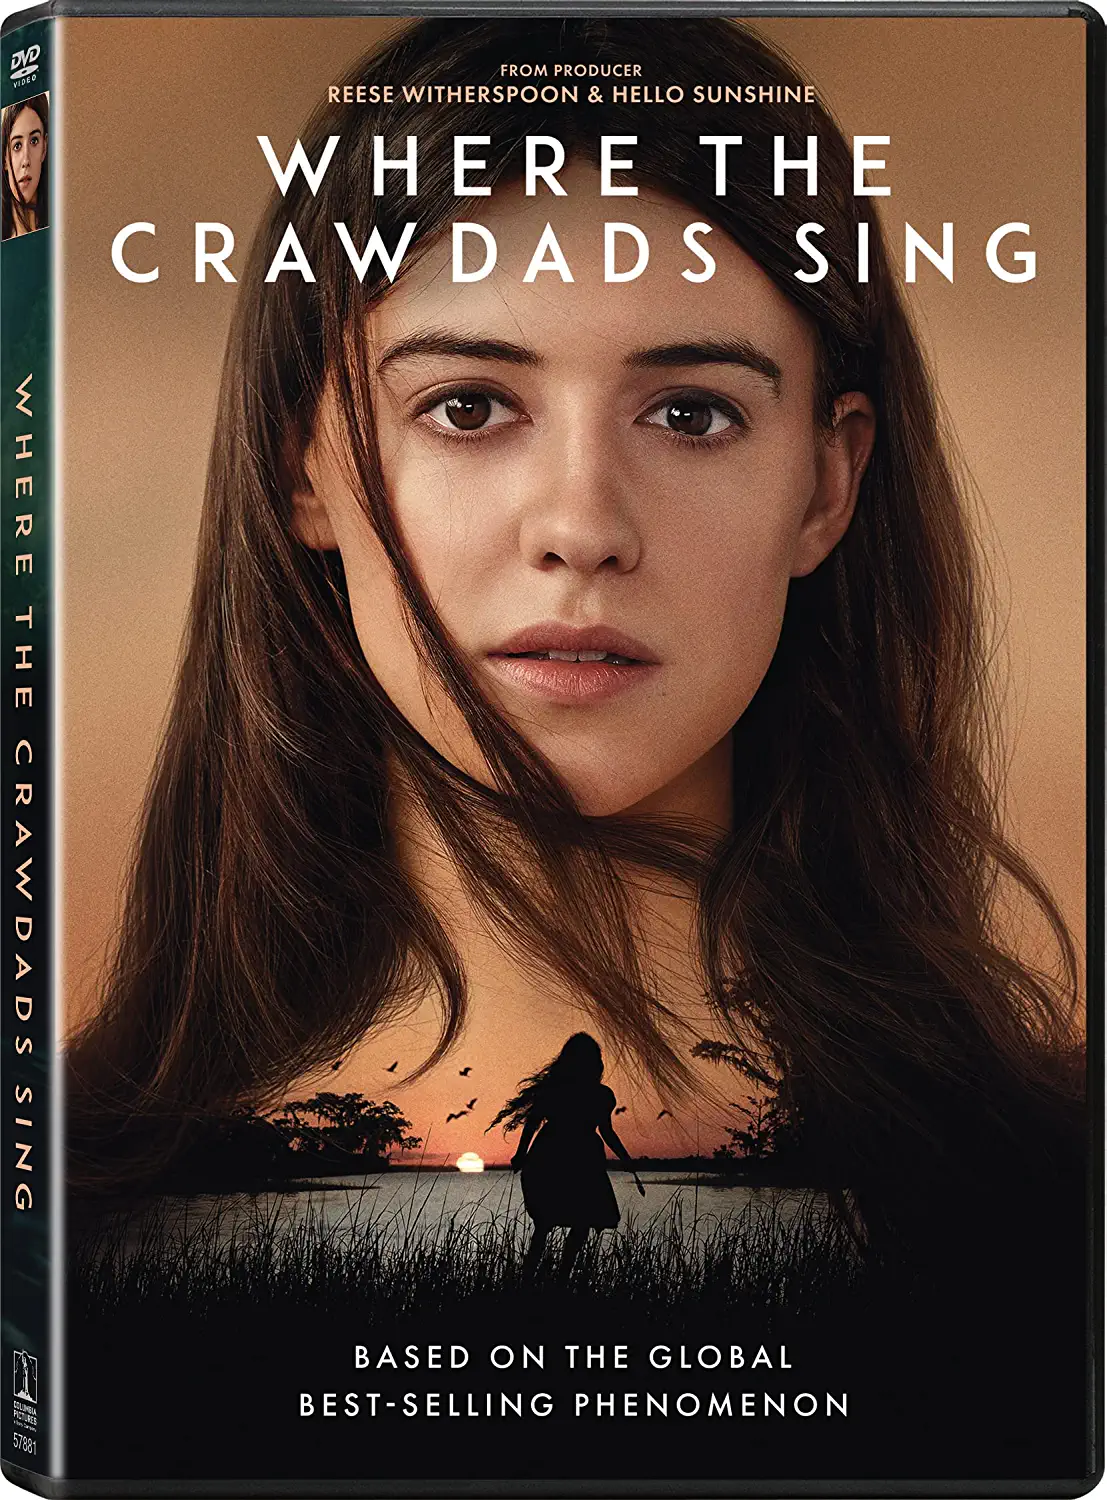 Image for "Where the crawdads sing"